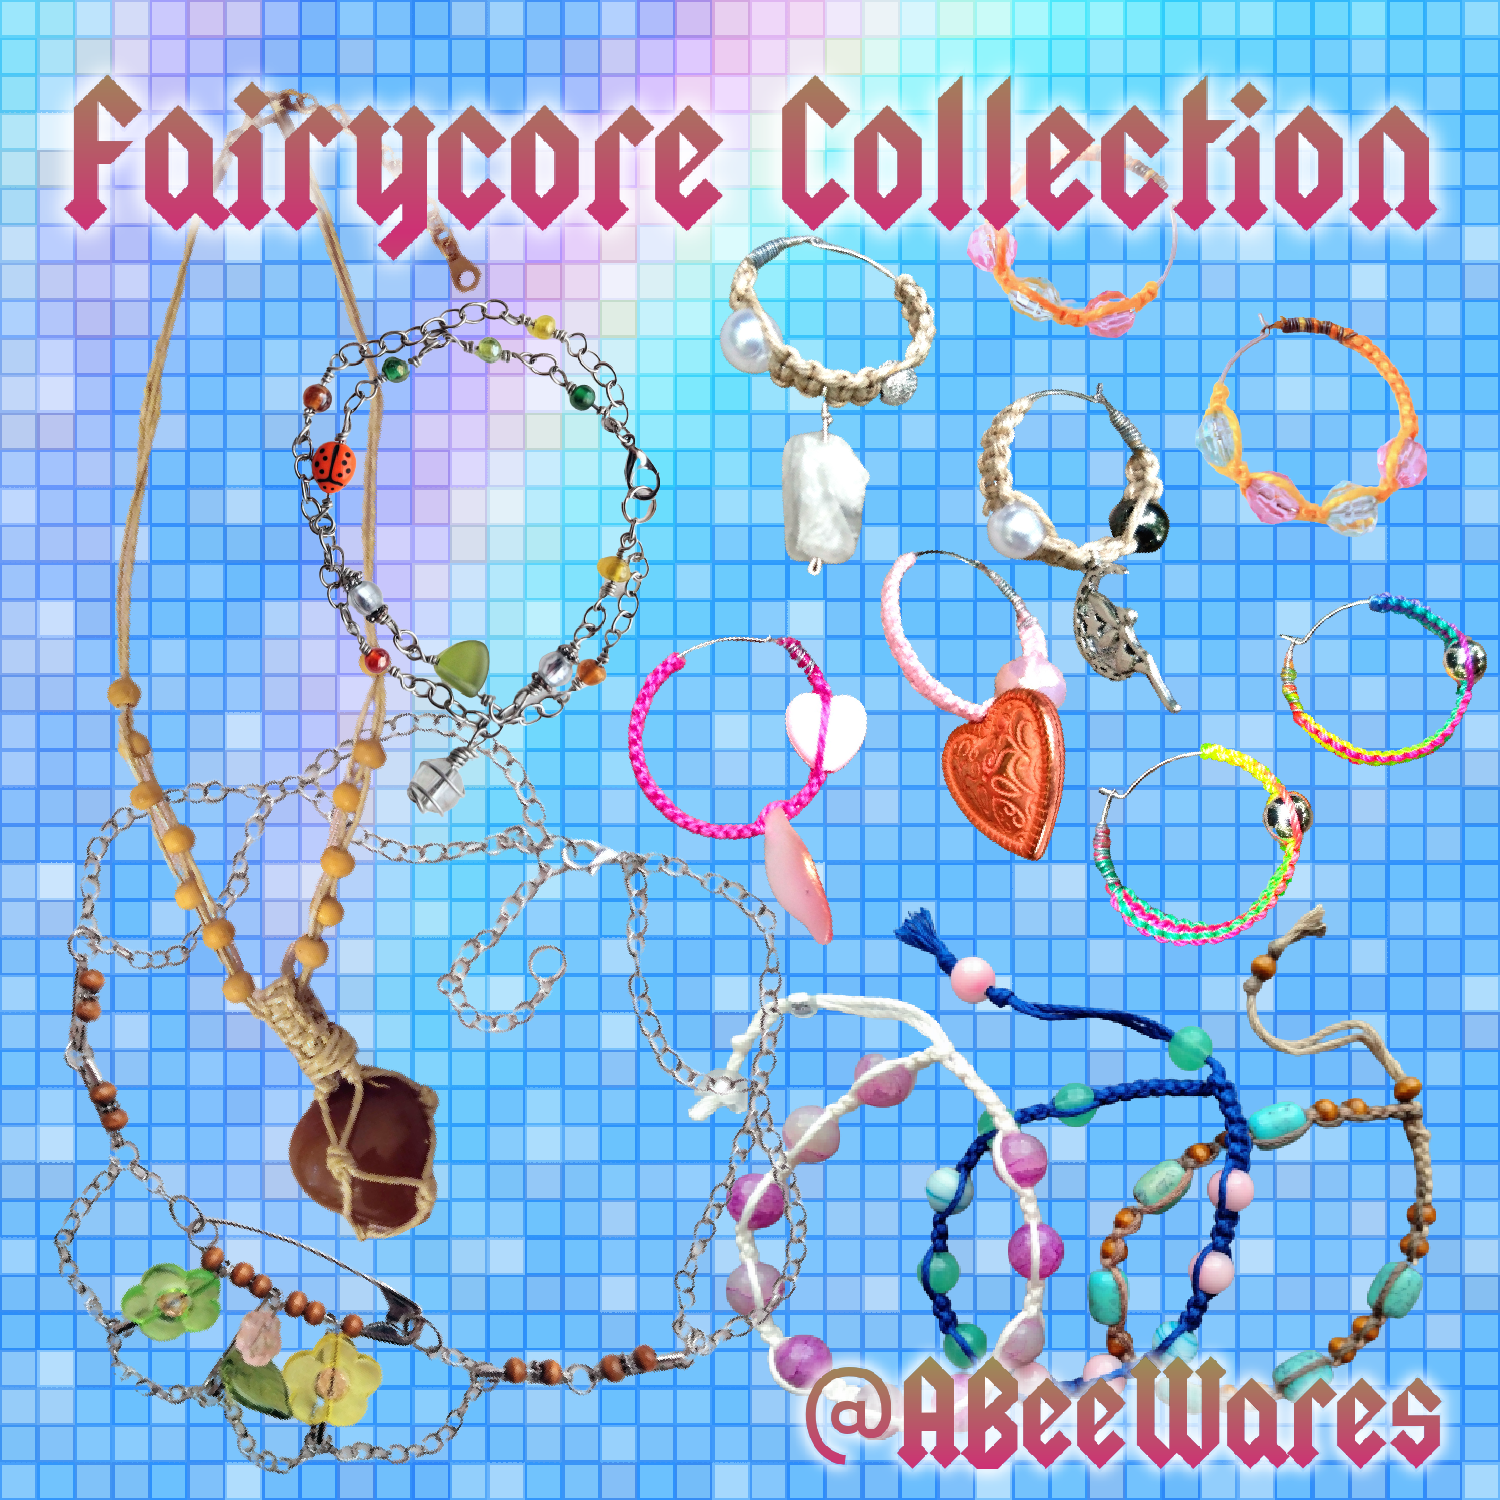 Fairycore collection, A Bee Wares, Etsy